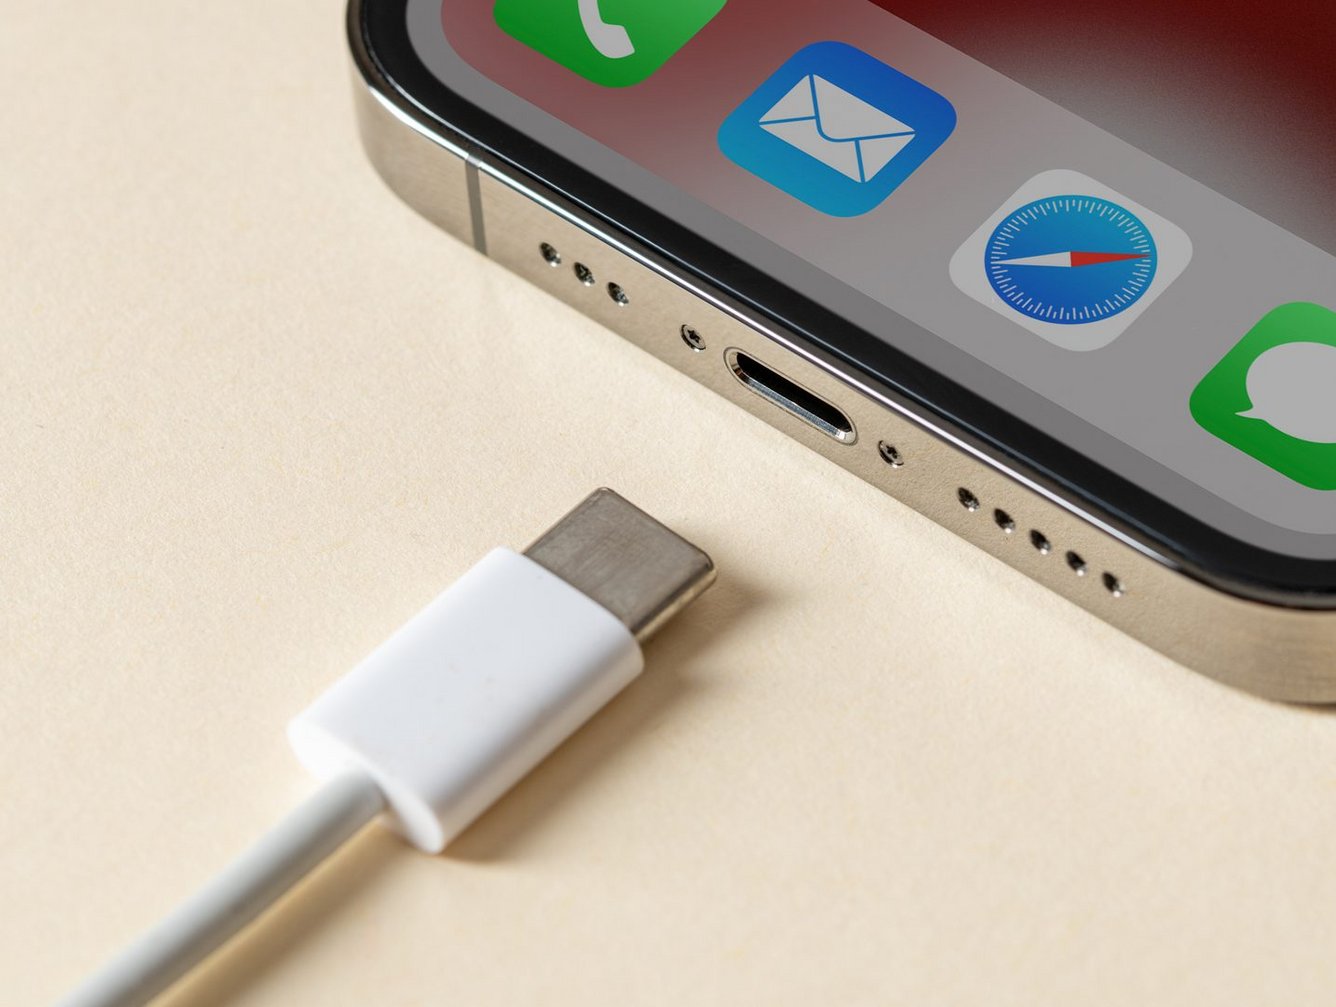 First Look at iPhone 15's Included USB-C Cable: Unveiling New Craftsmanship  and Design - Chargerlab